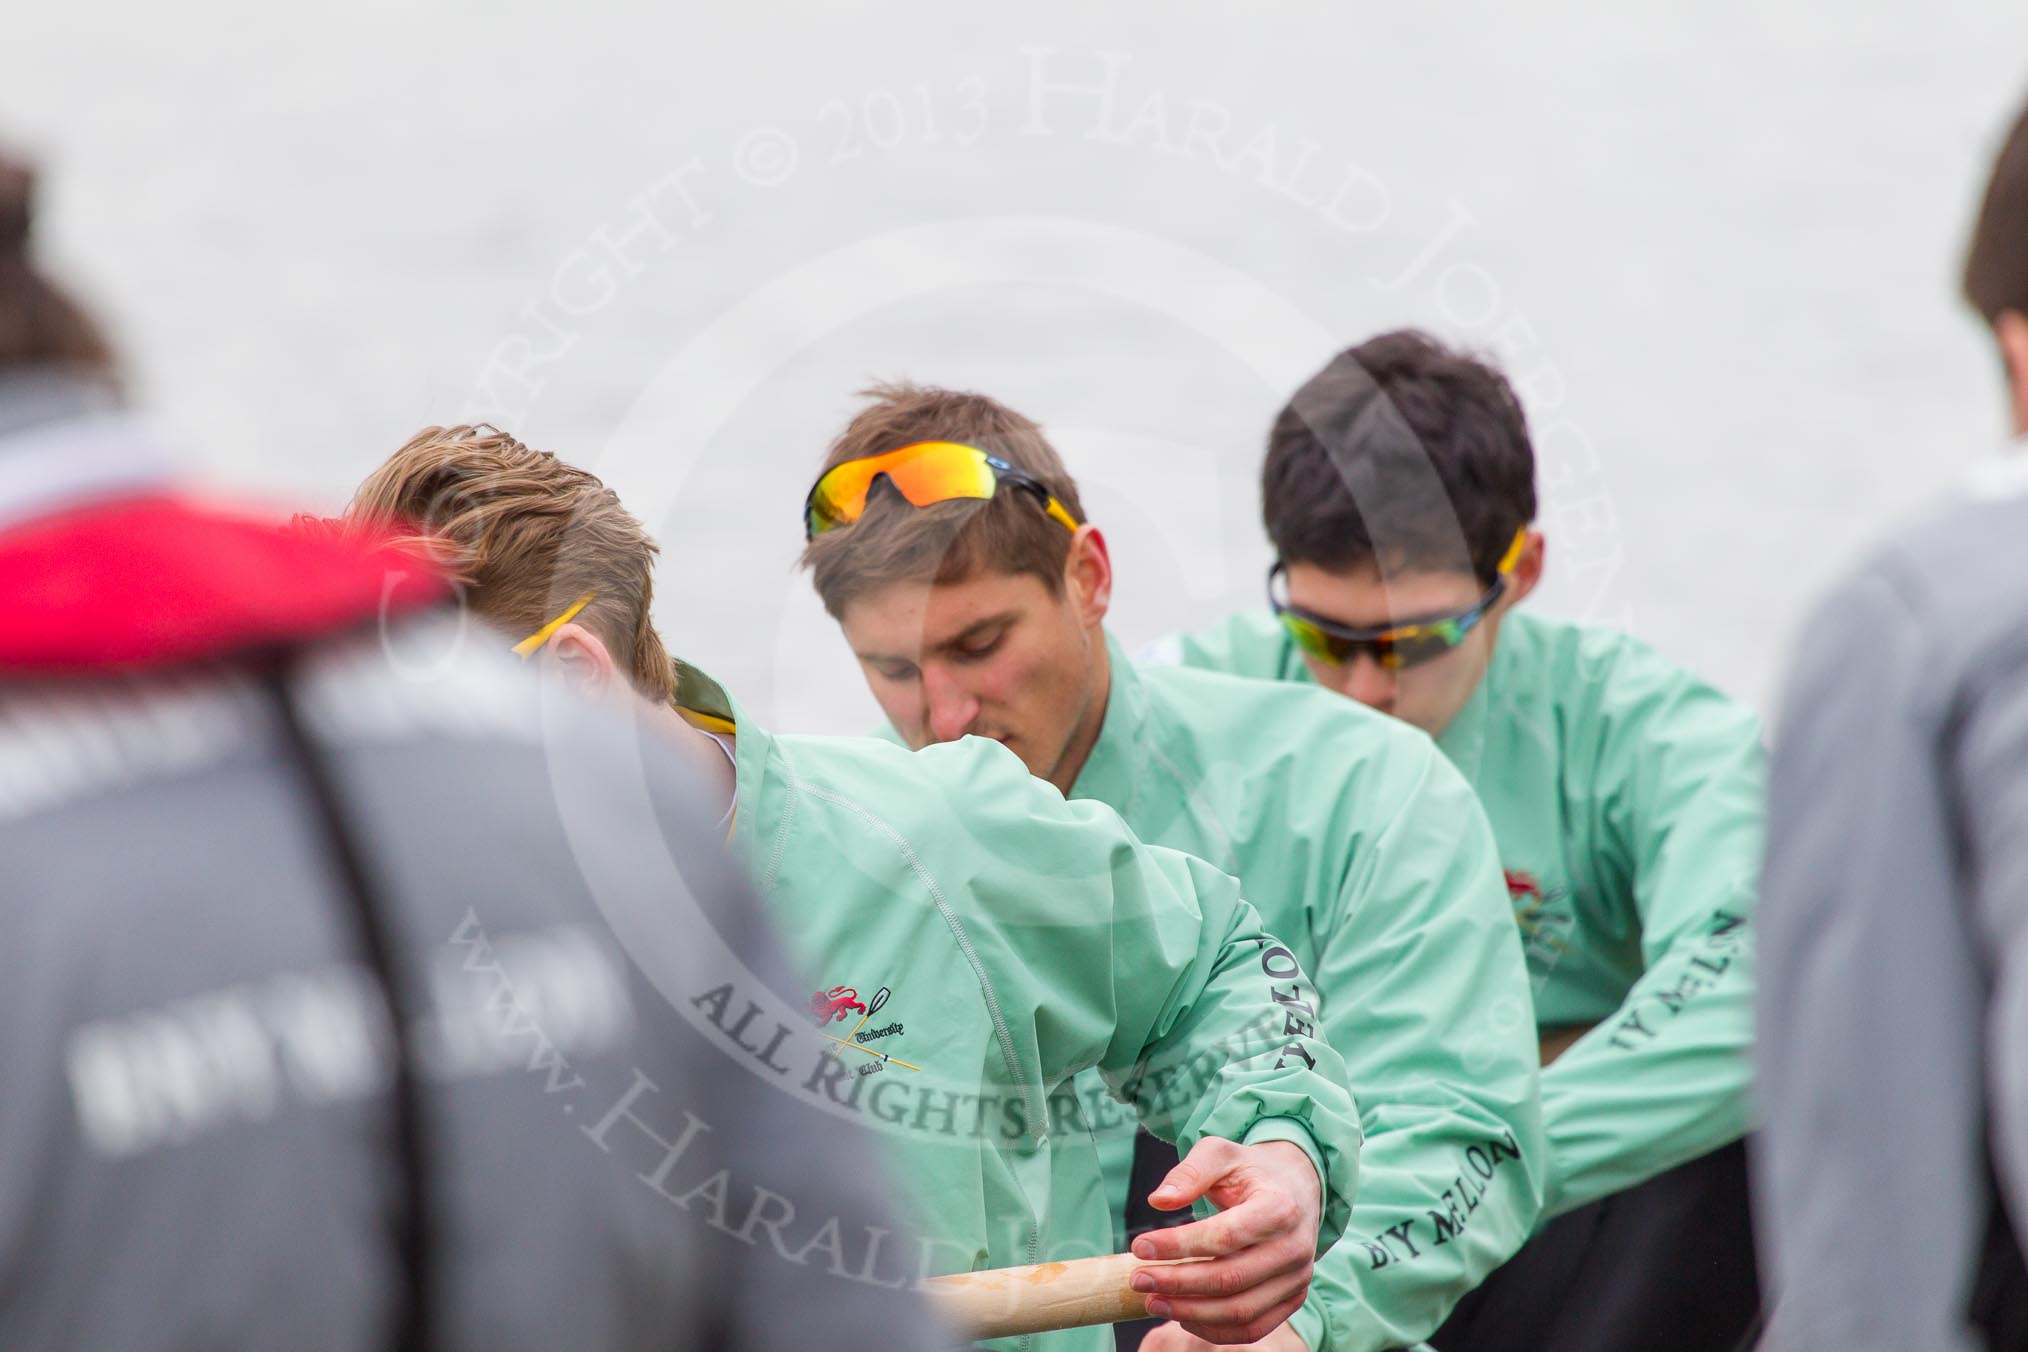 The Boat Race 2013.
Putney,
London SW15,

United Kingdom,
on 31 March 2013 at 15:19, image #126